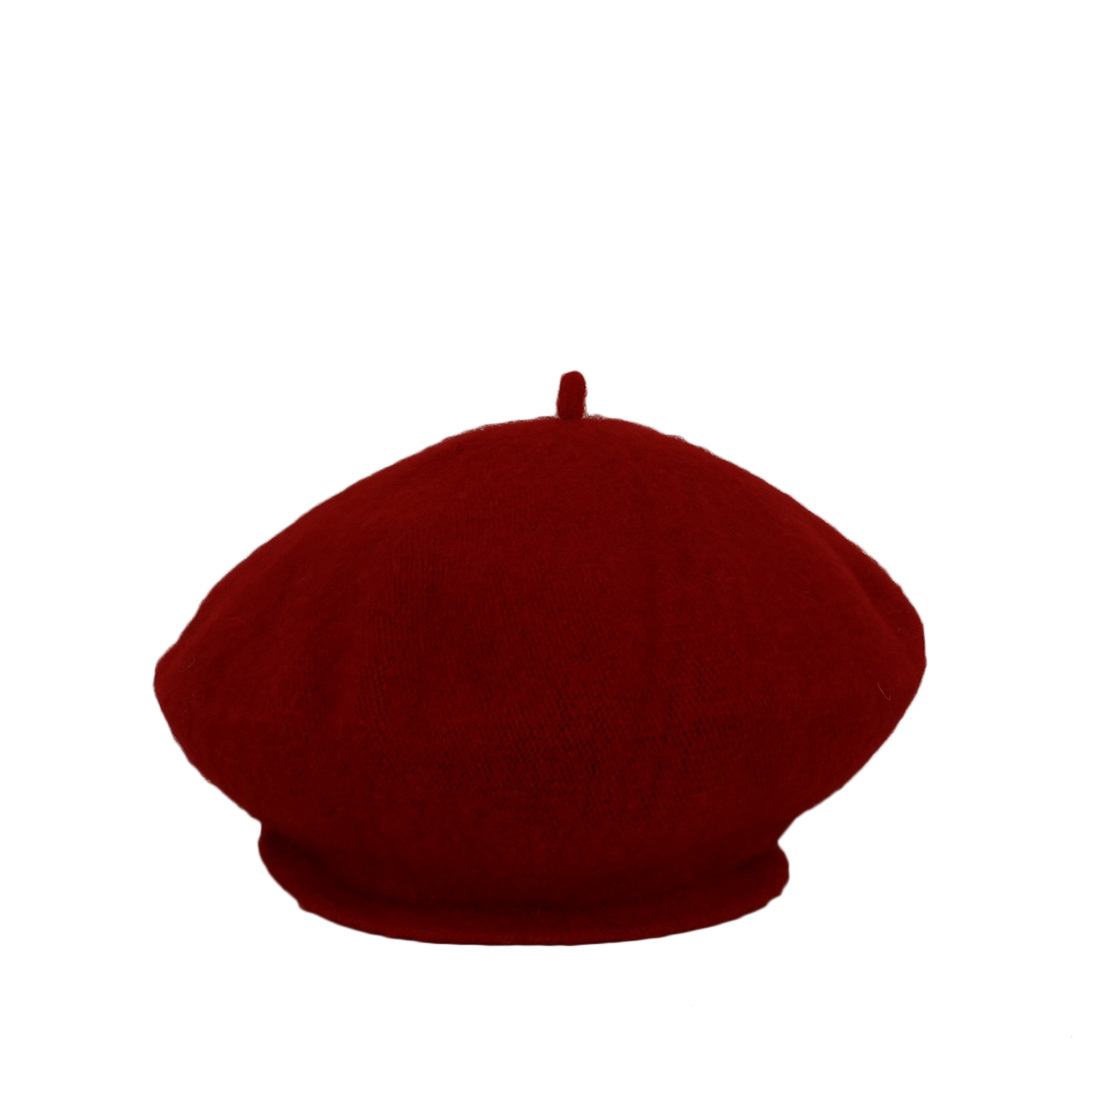 * French style barret cap